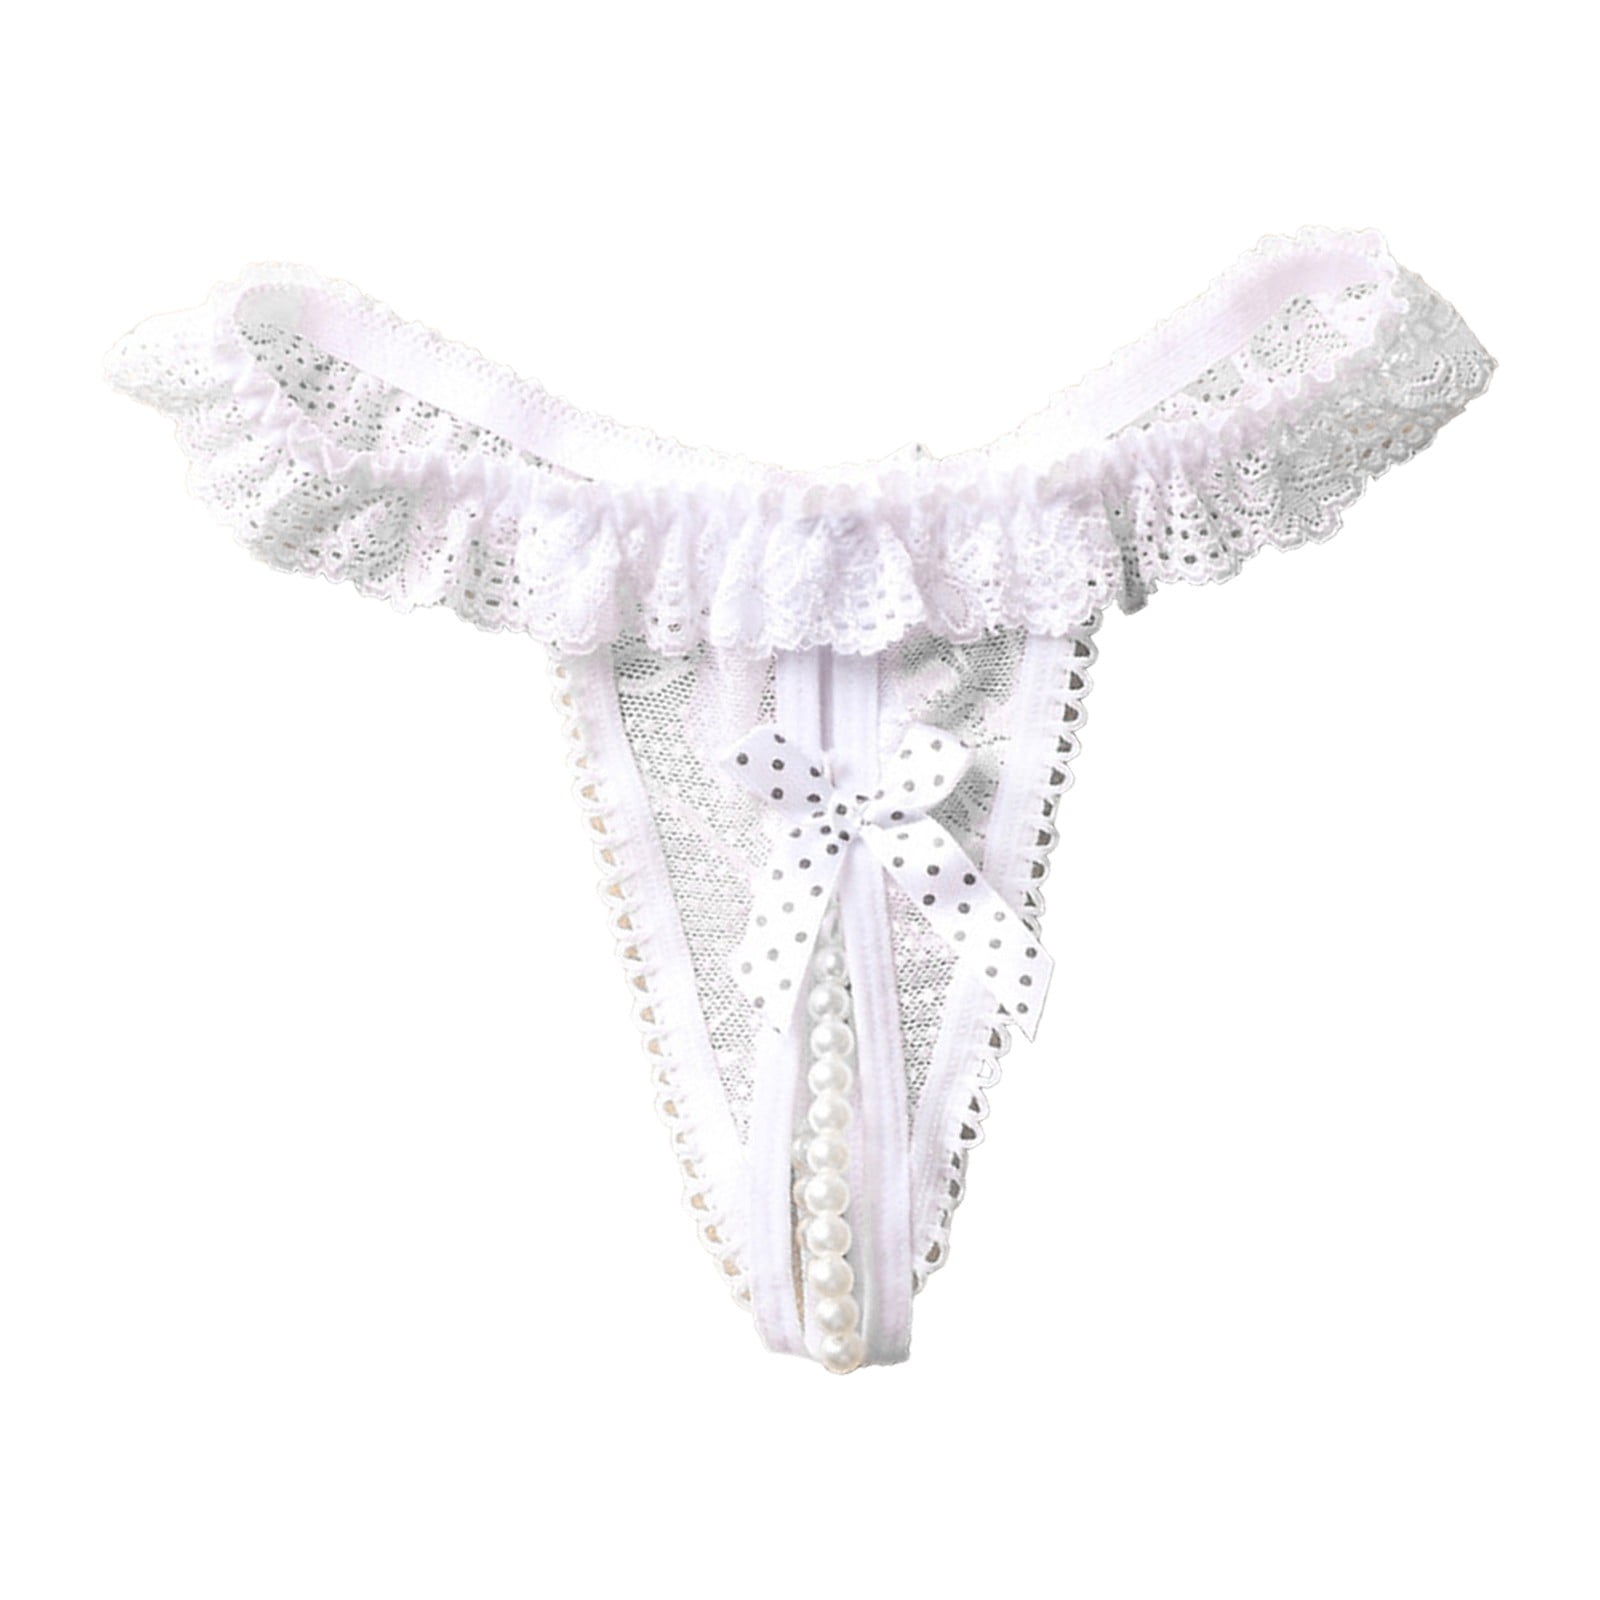 CBGELRT Women's Brief Women's Lingerie Pearl Underwear Lace Panties with  Bow Briefs s Panties One Size White 